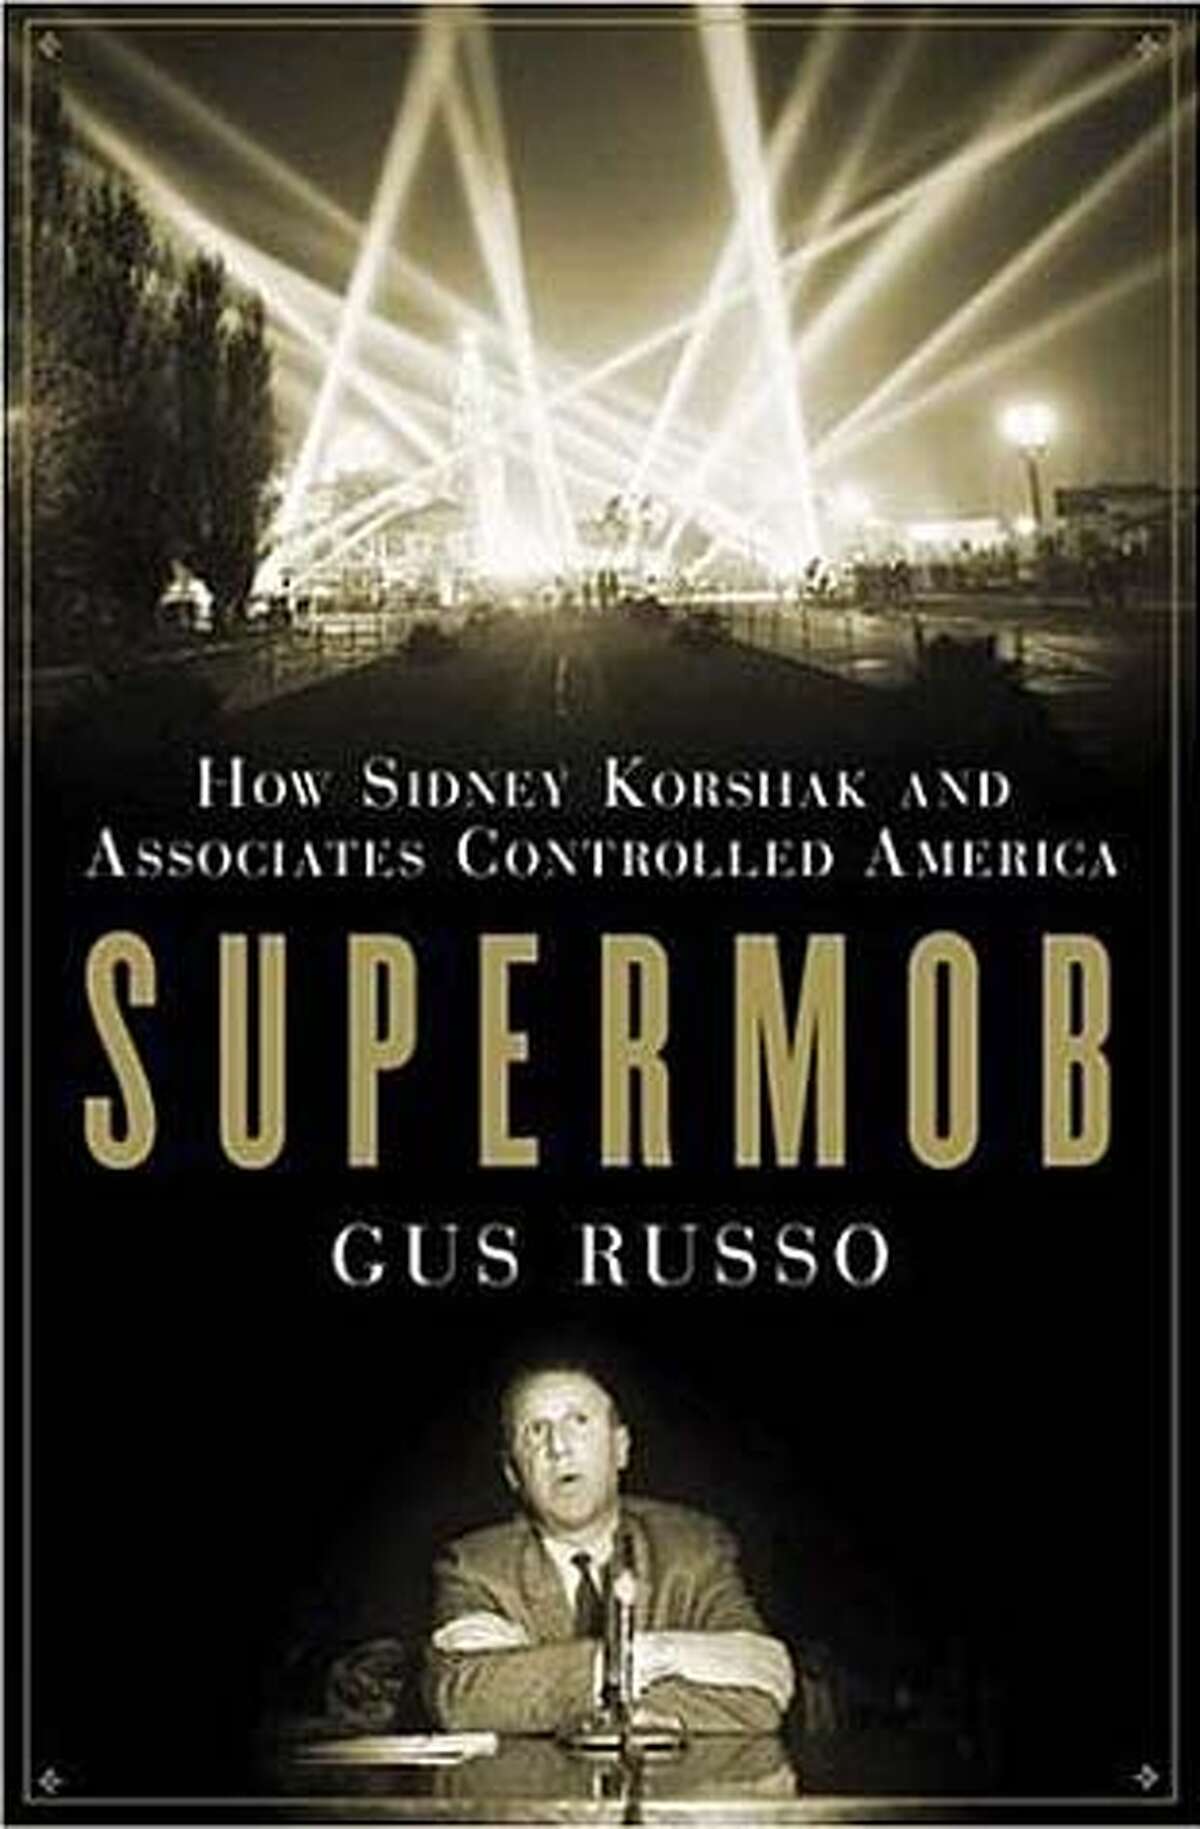 Cover art for Gus Russo's "Supermob"